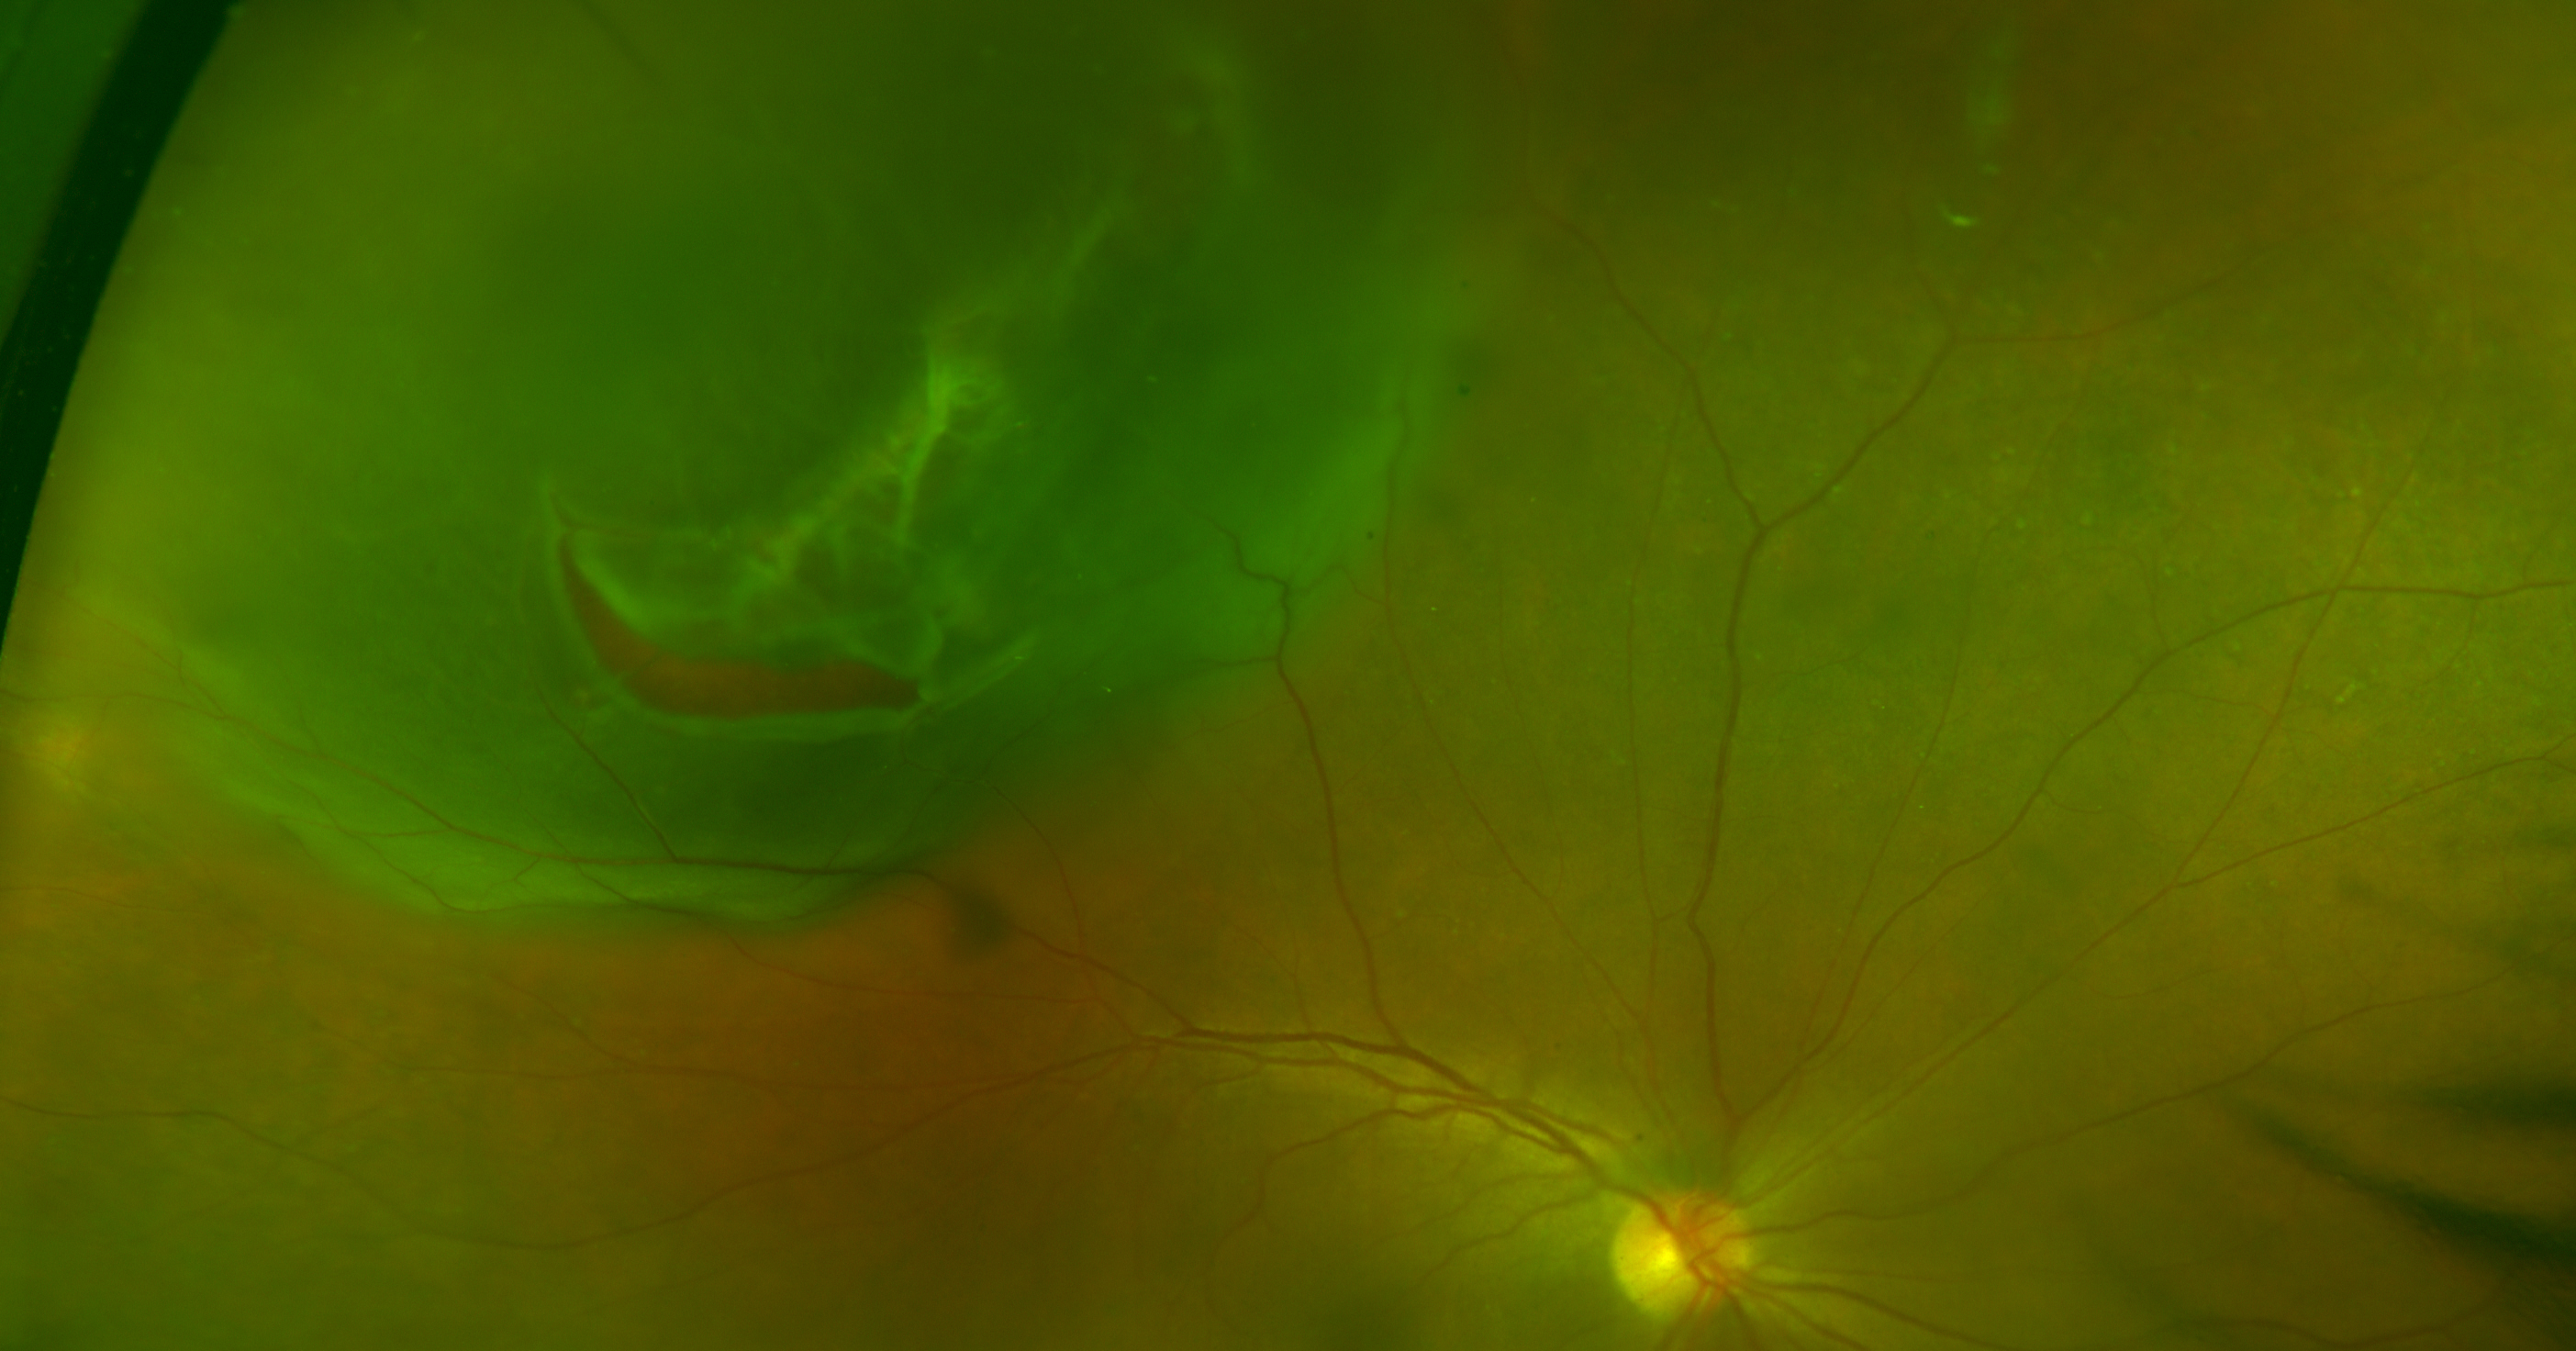 Photo of an eye with a retinal detachment with a retinal tear